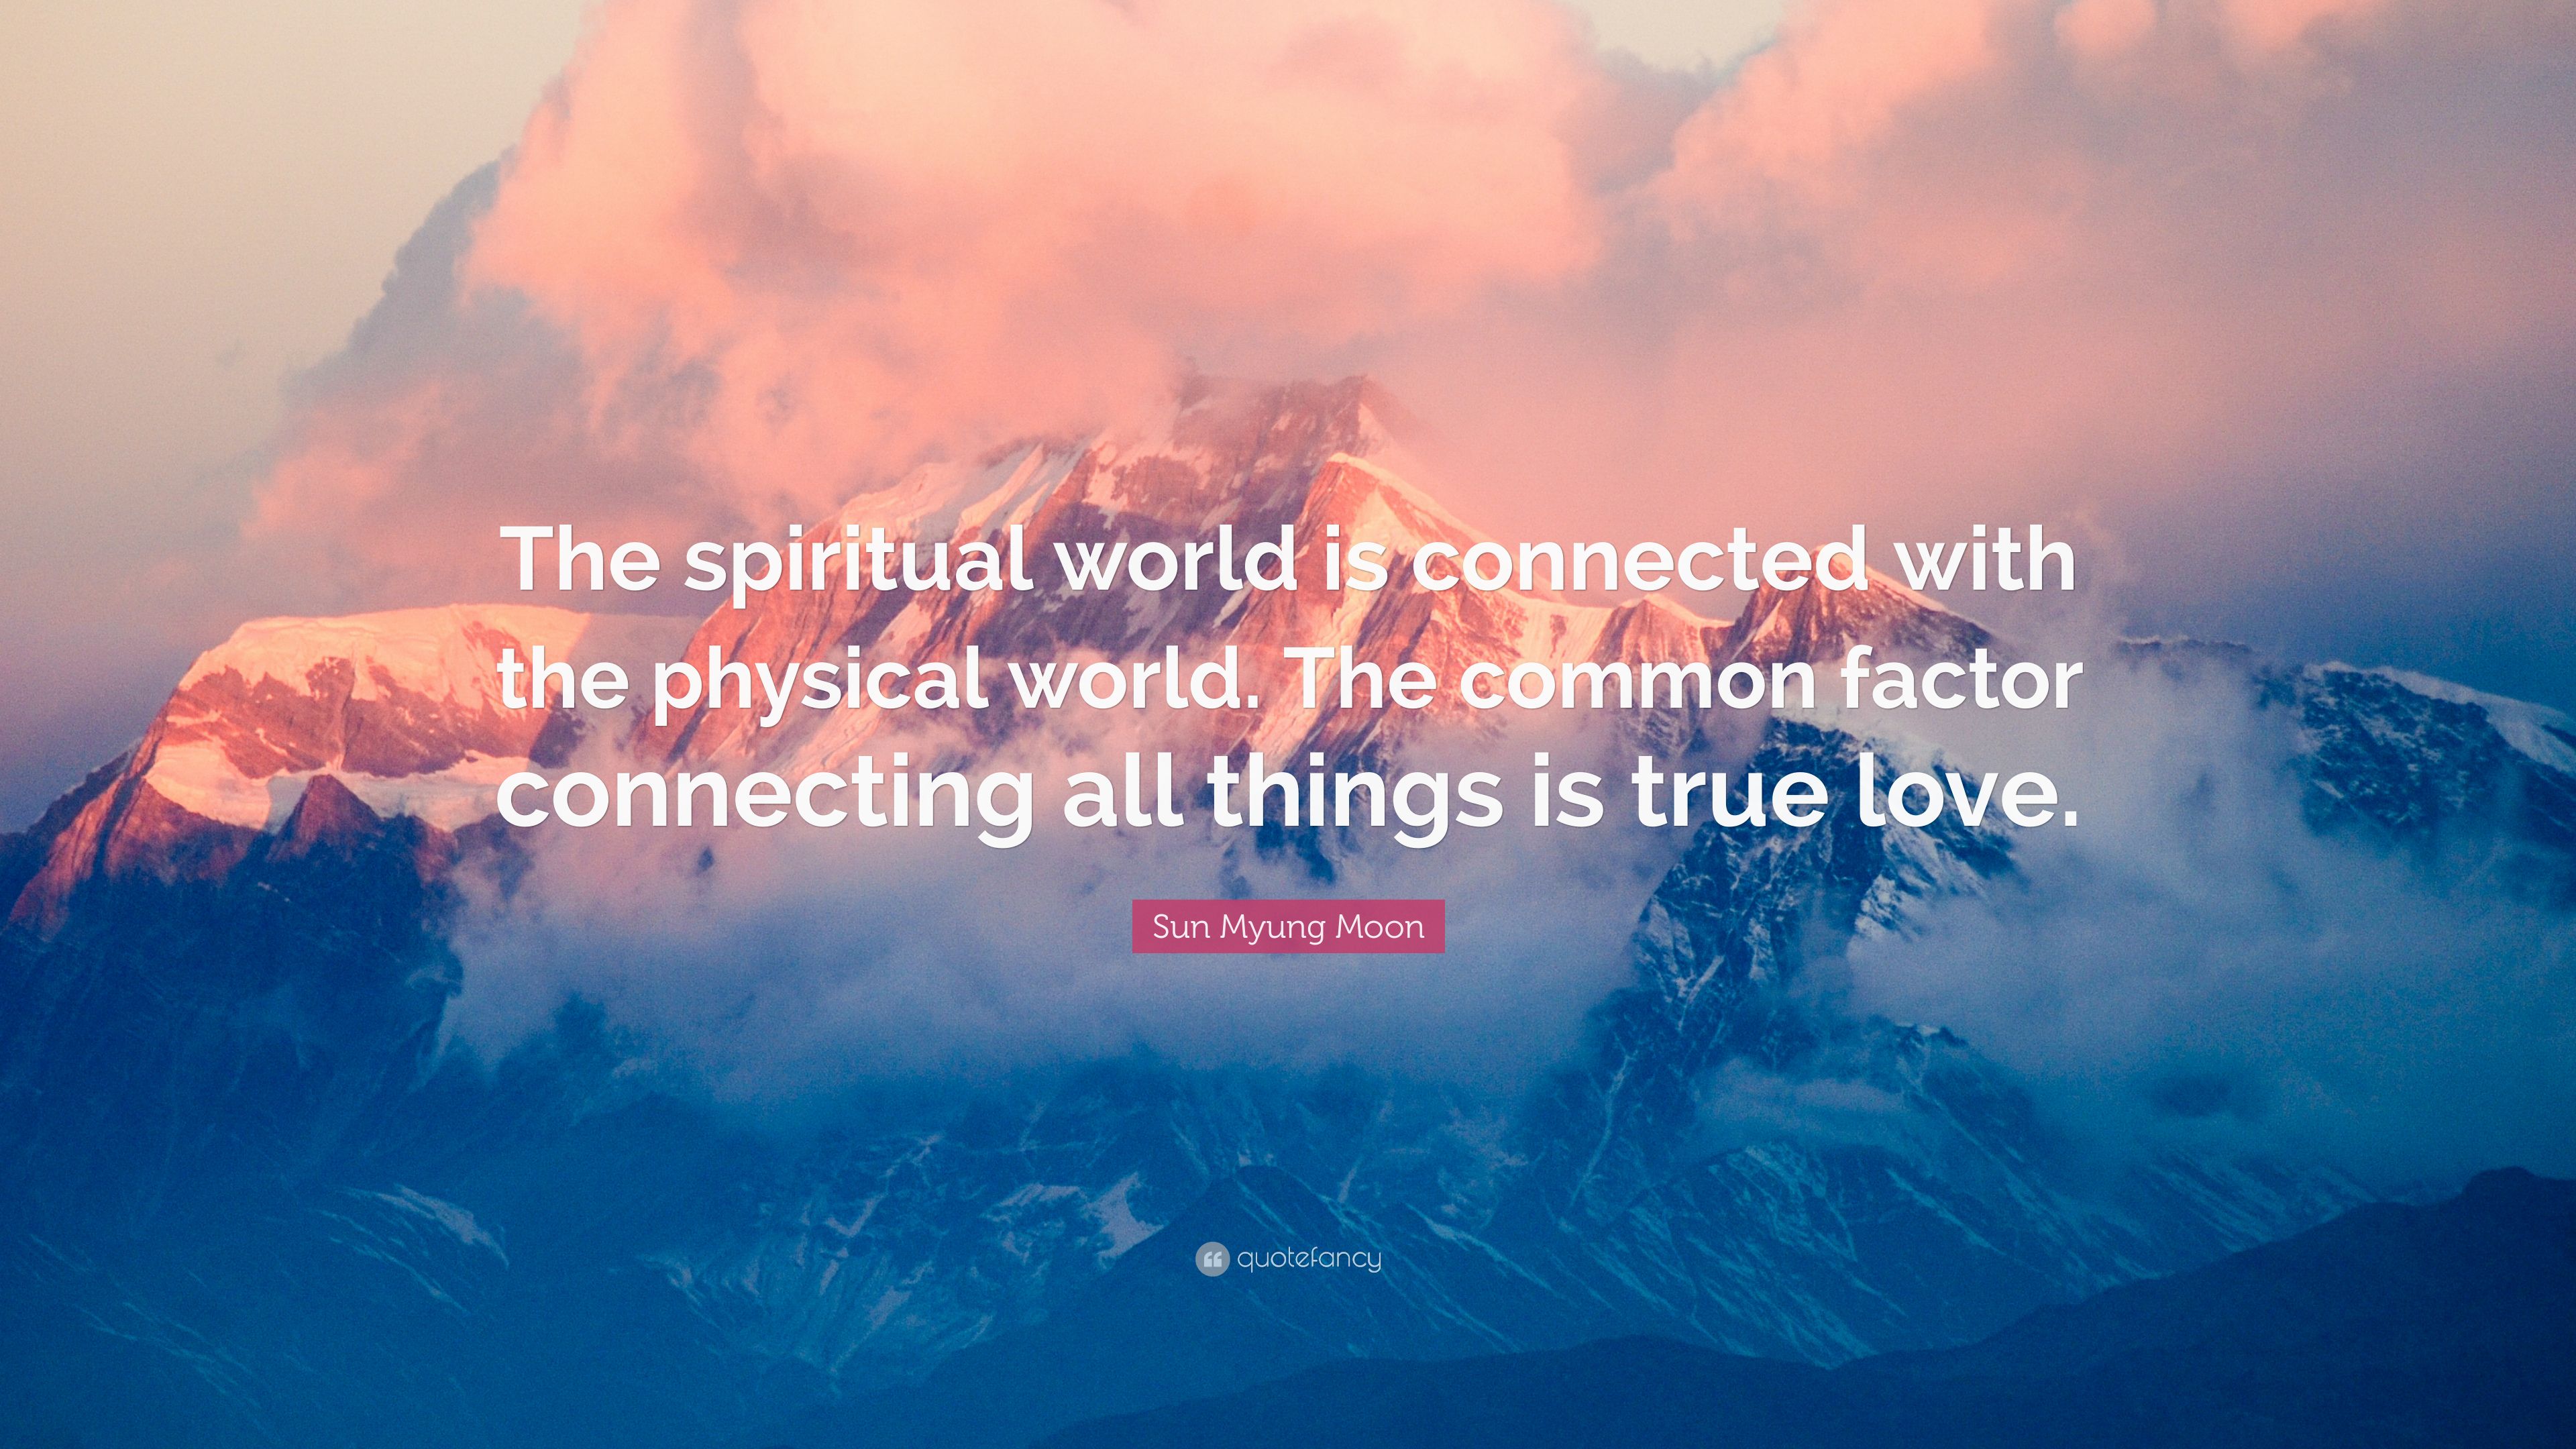 Sun Myung Moon Quote: “The spiritual world is connected with